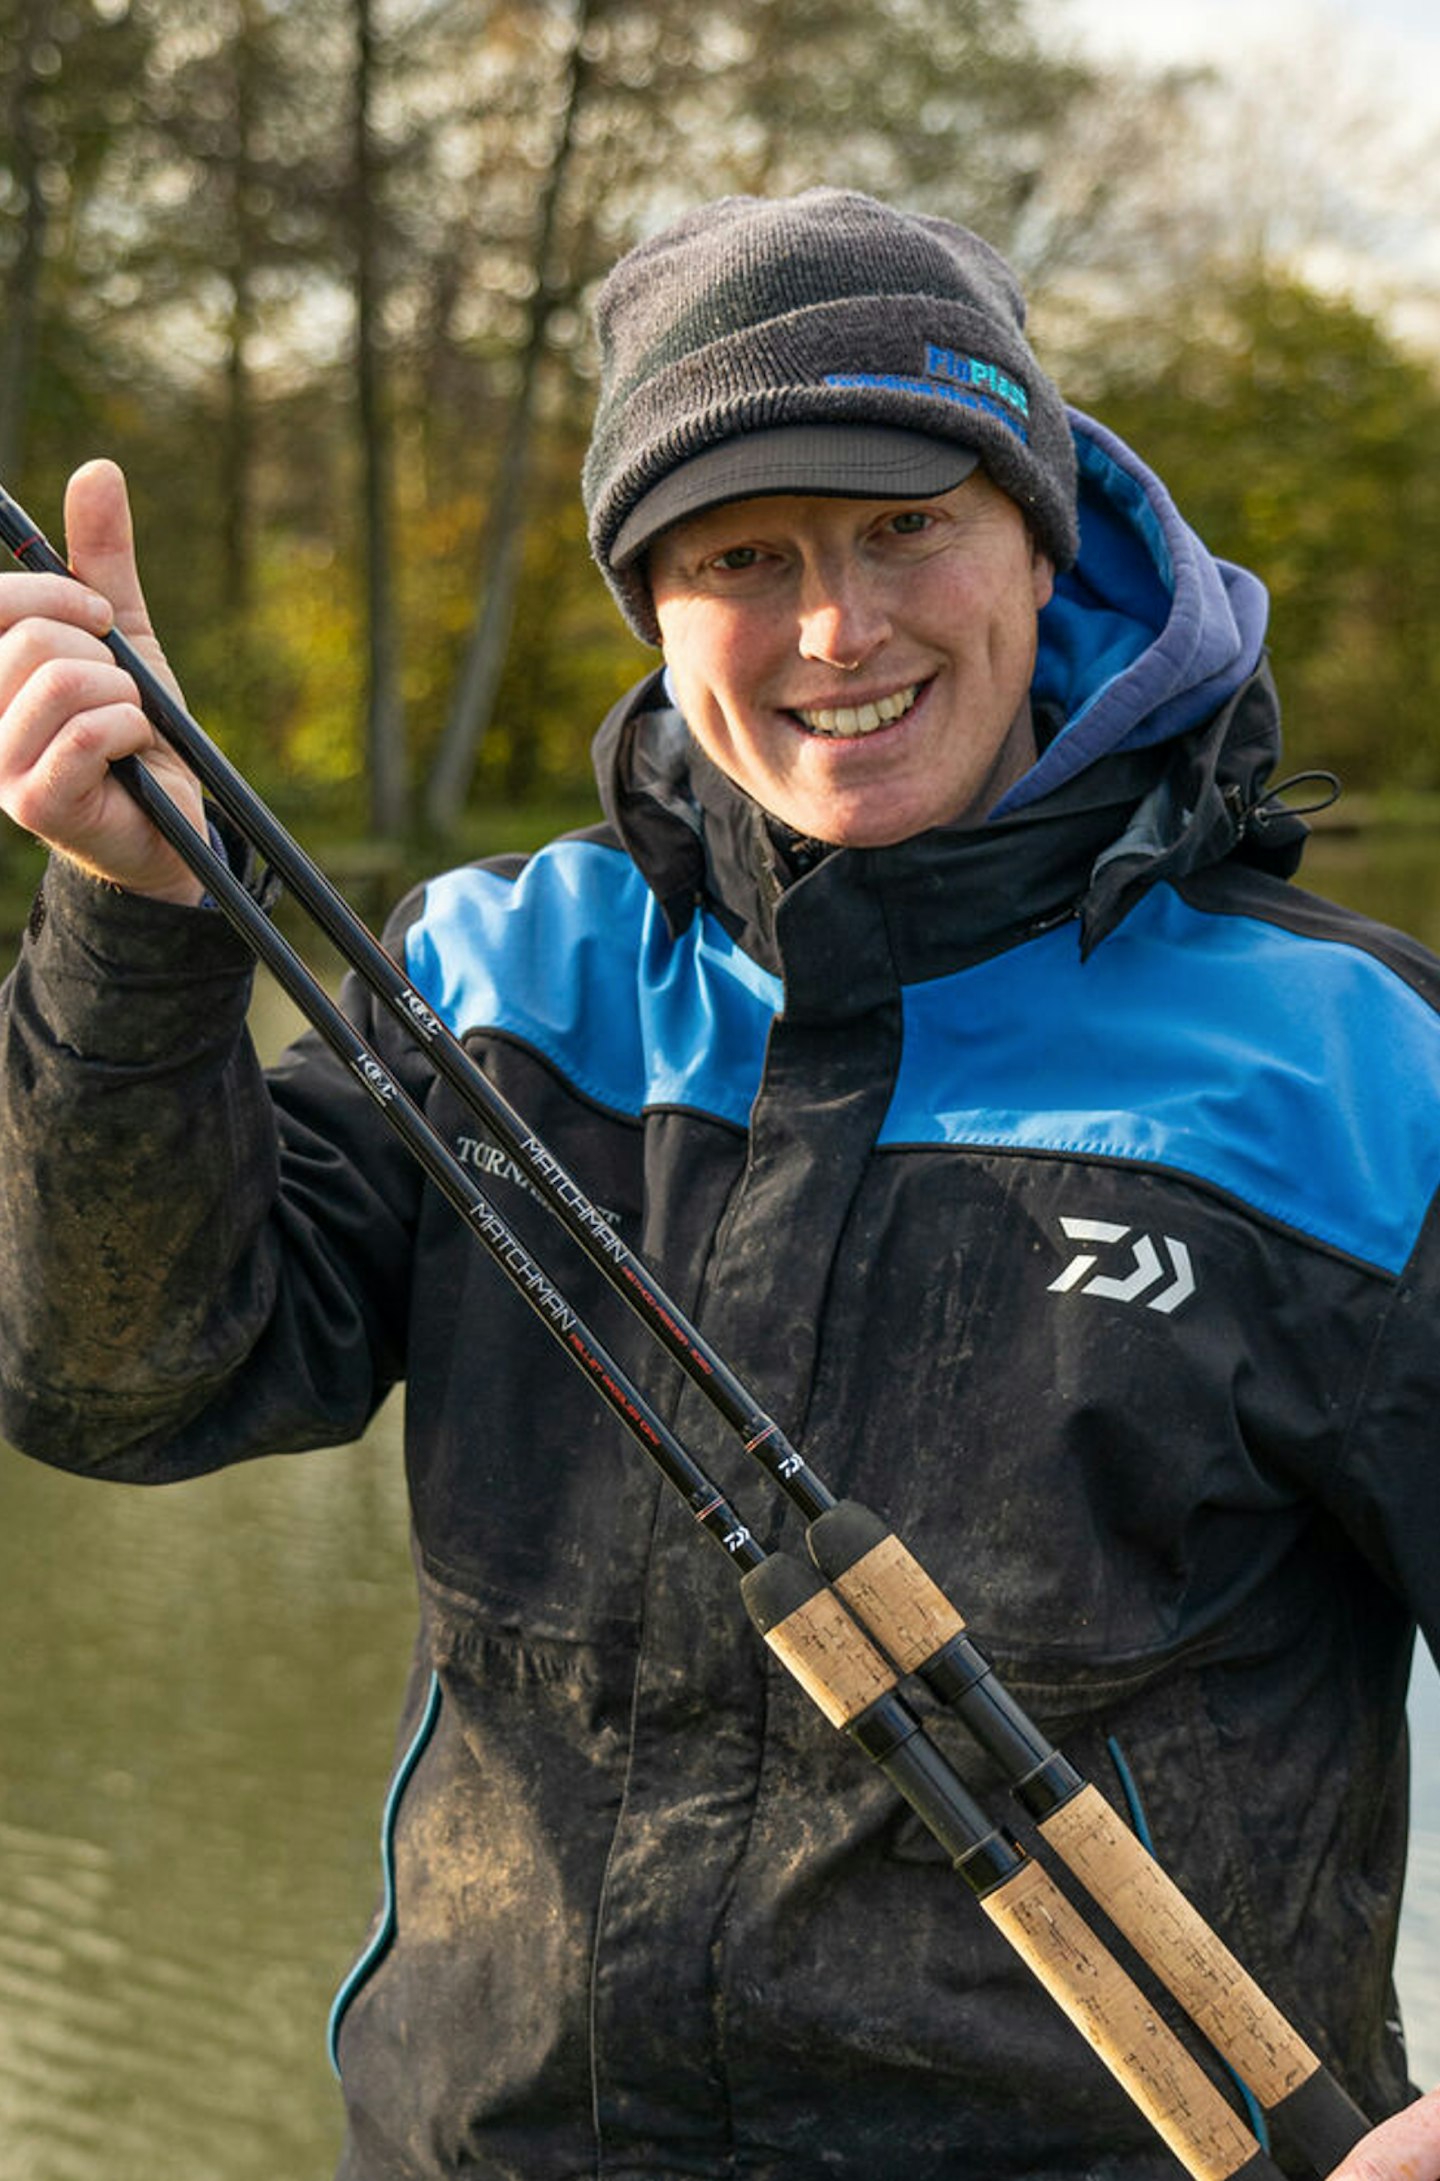 The range would make ideal allround waggler and feeder rods for any kind of venue